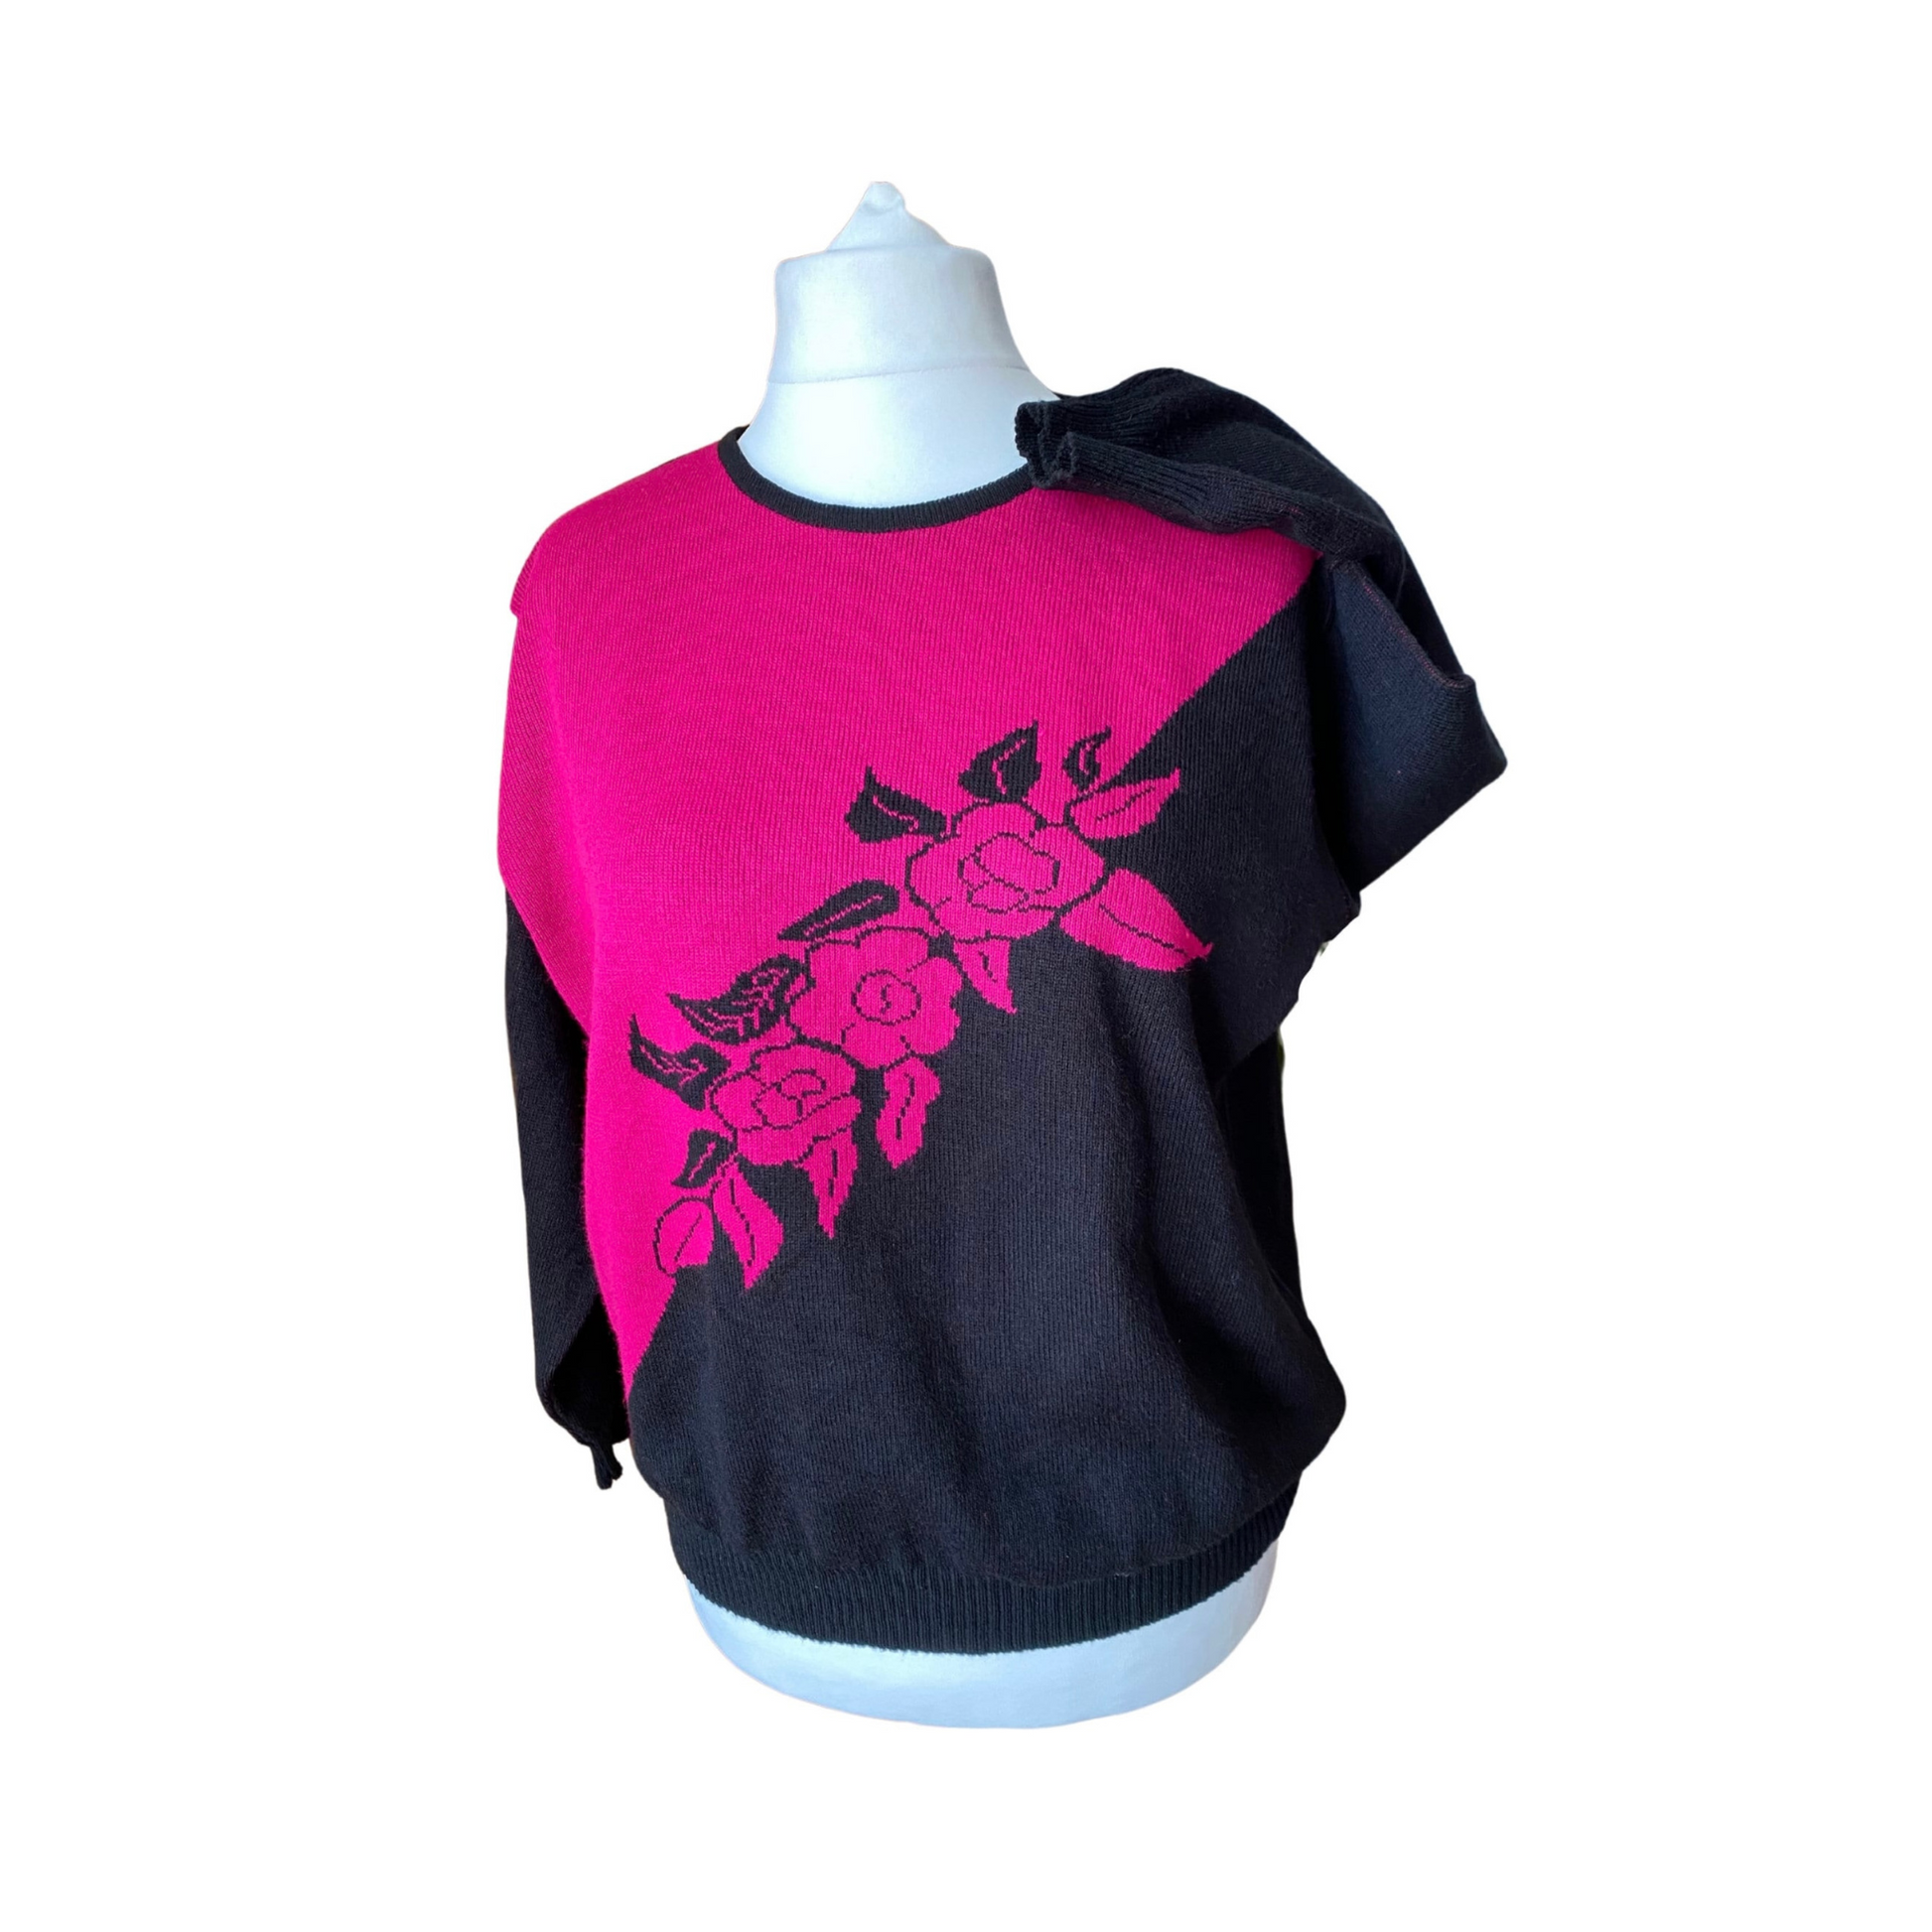 Eye-catching 80s black and cerise print crew neck jumper - perfect for a retro look.